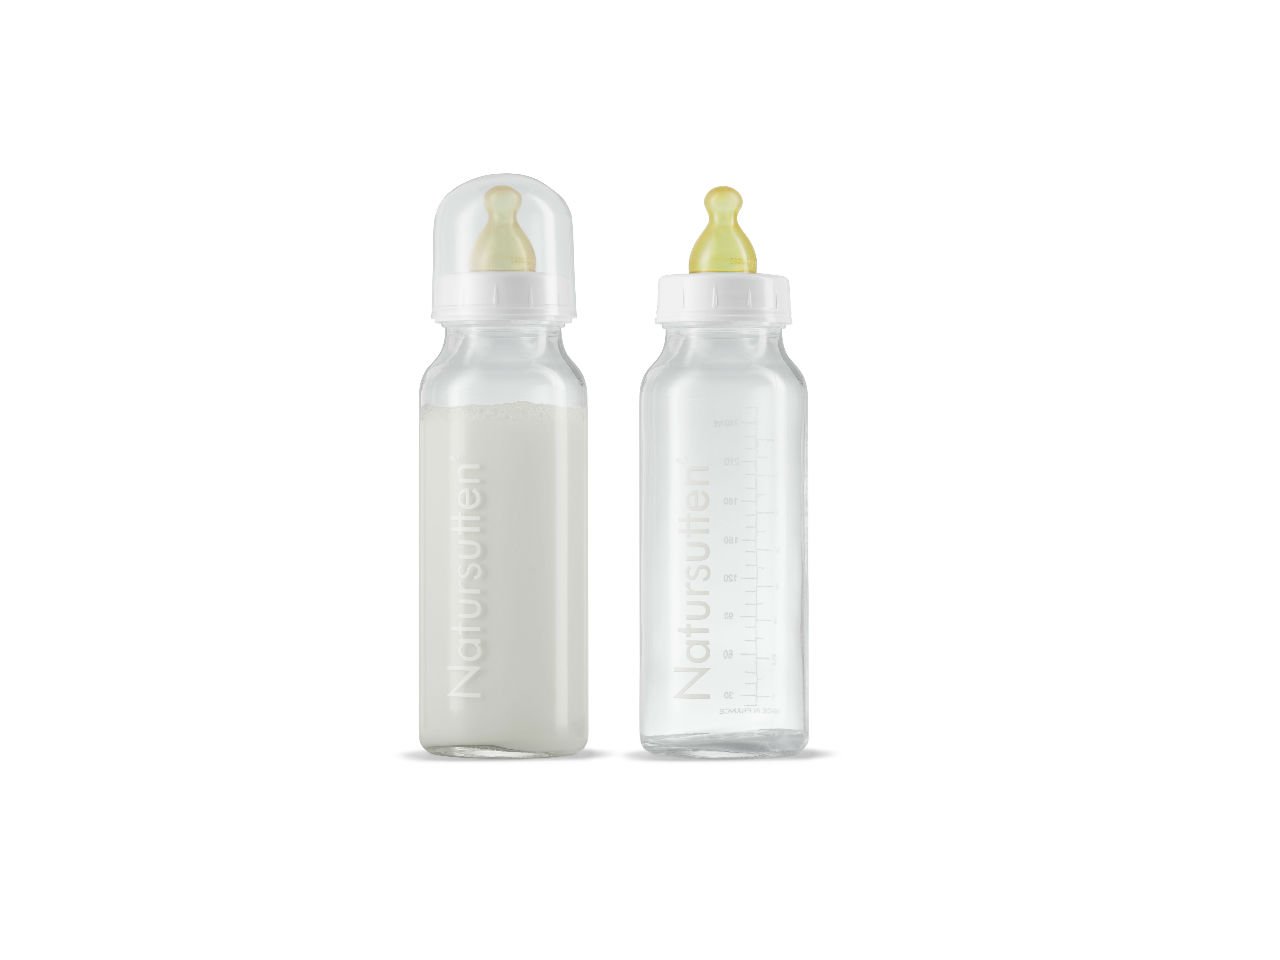 natural rubber baby bottle nipples